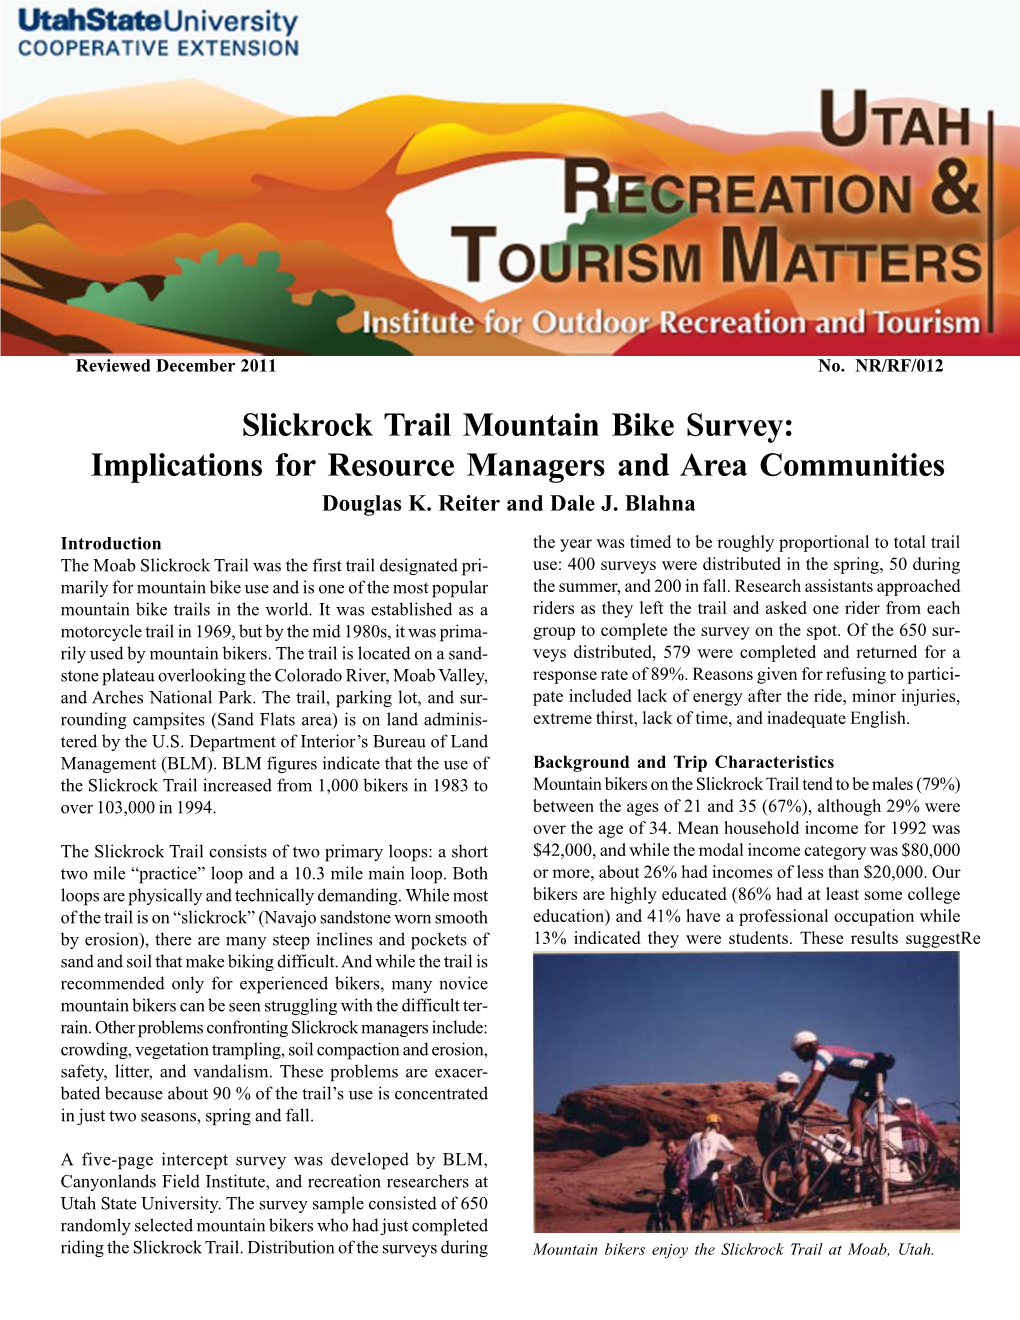 Slickrock Trail Mountain Bike Survey: Implications for Resource Managers and Area Communities Douglas K